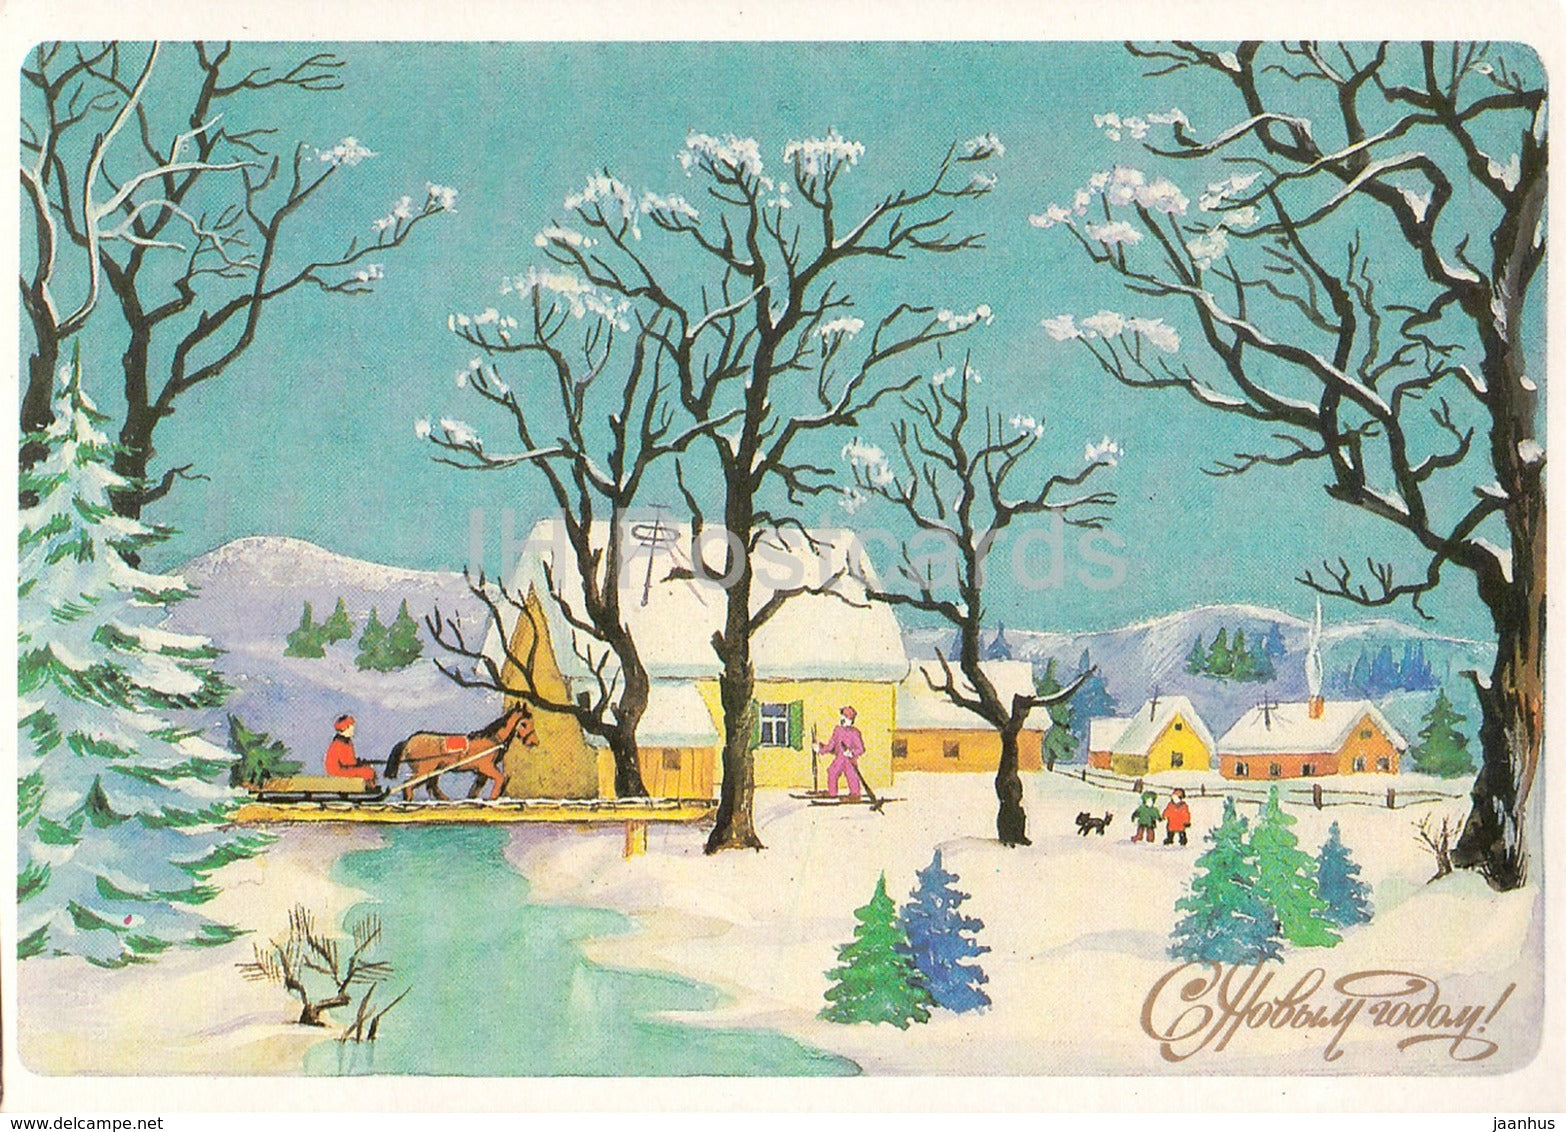 New Year Greeting Card by T. Snapiro - Horse Sledge - house - 1988 - Russia USSR - unused - JH Postcards